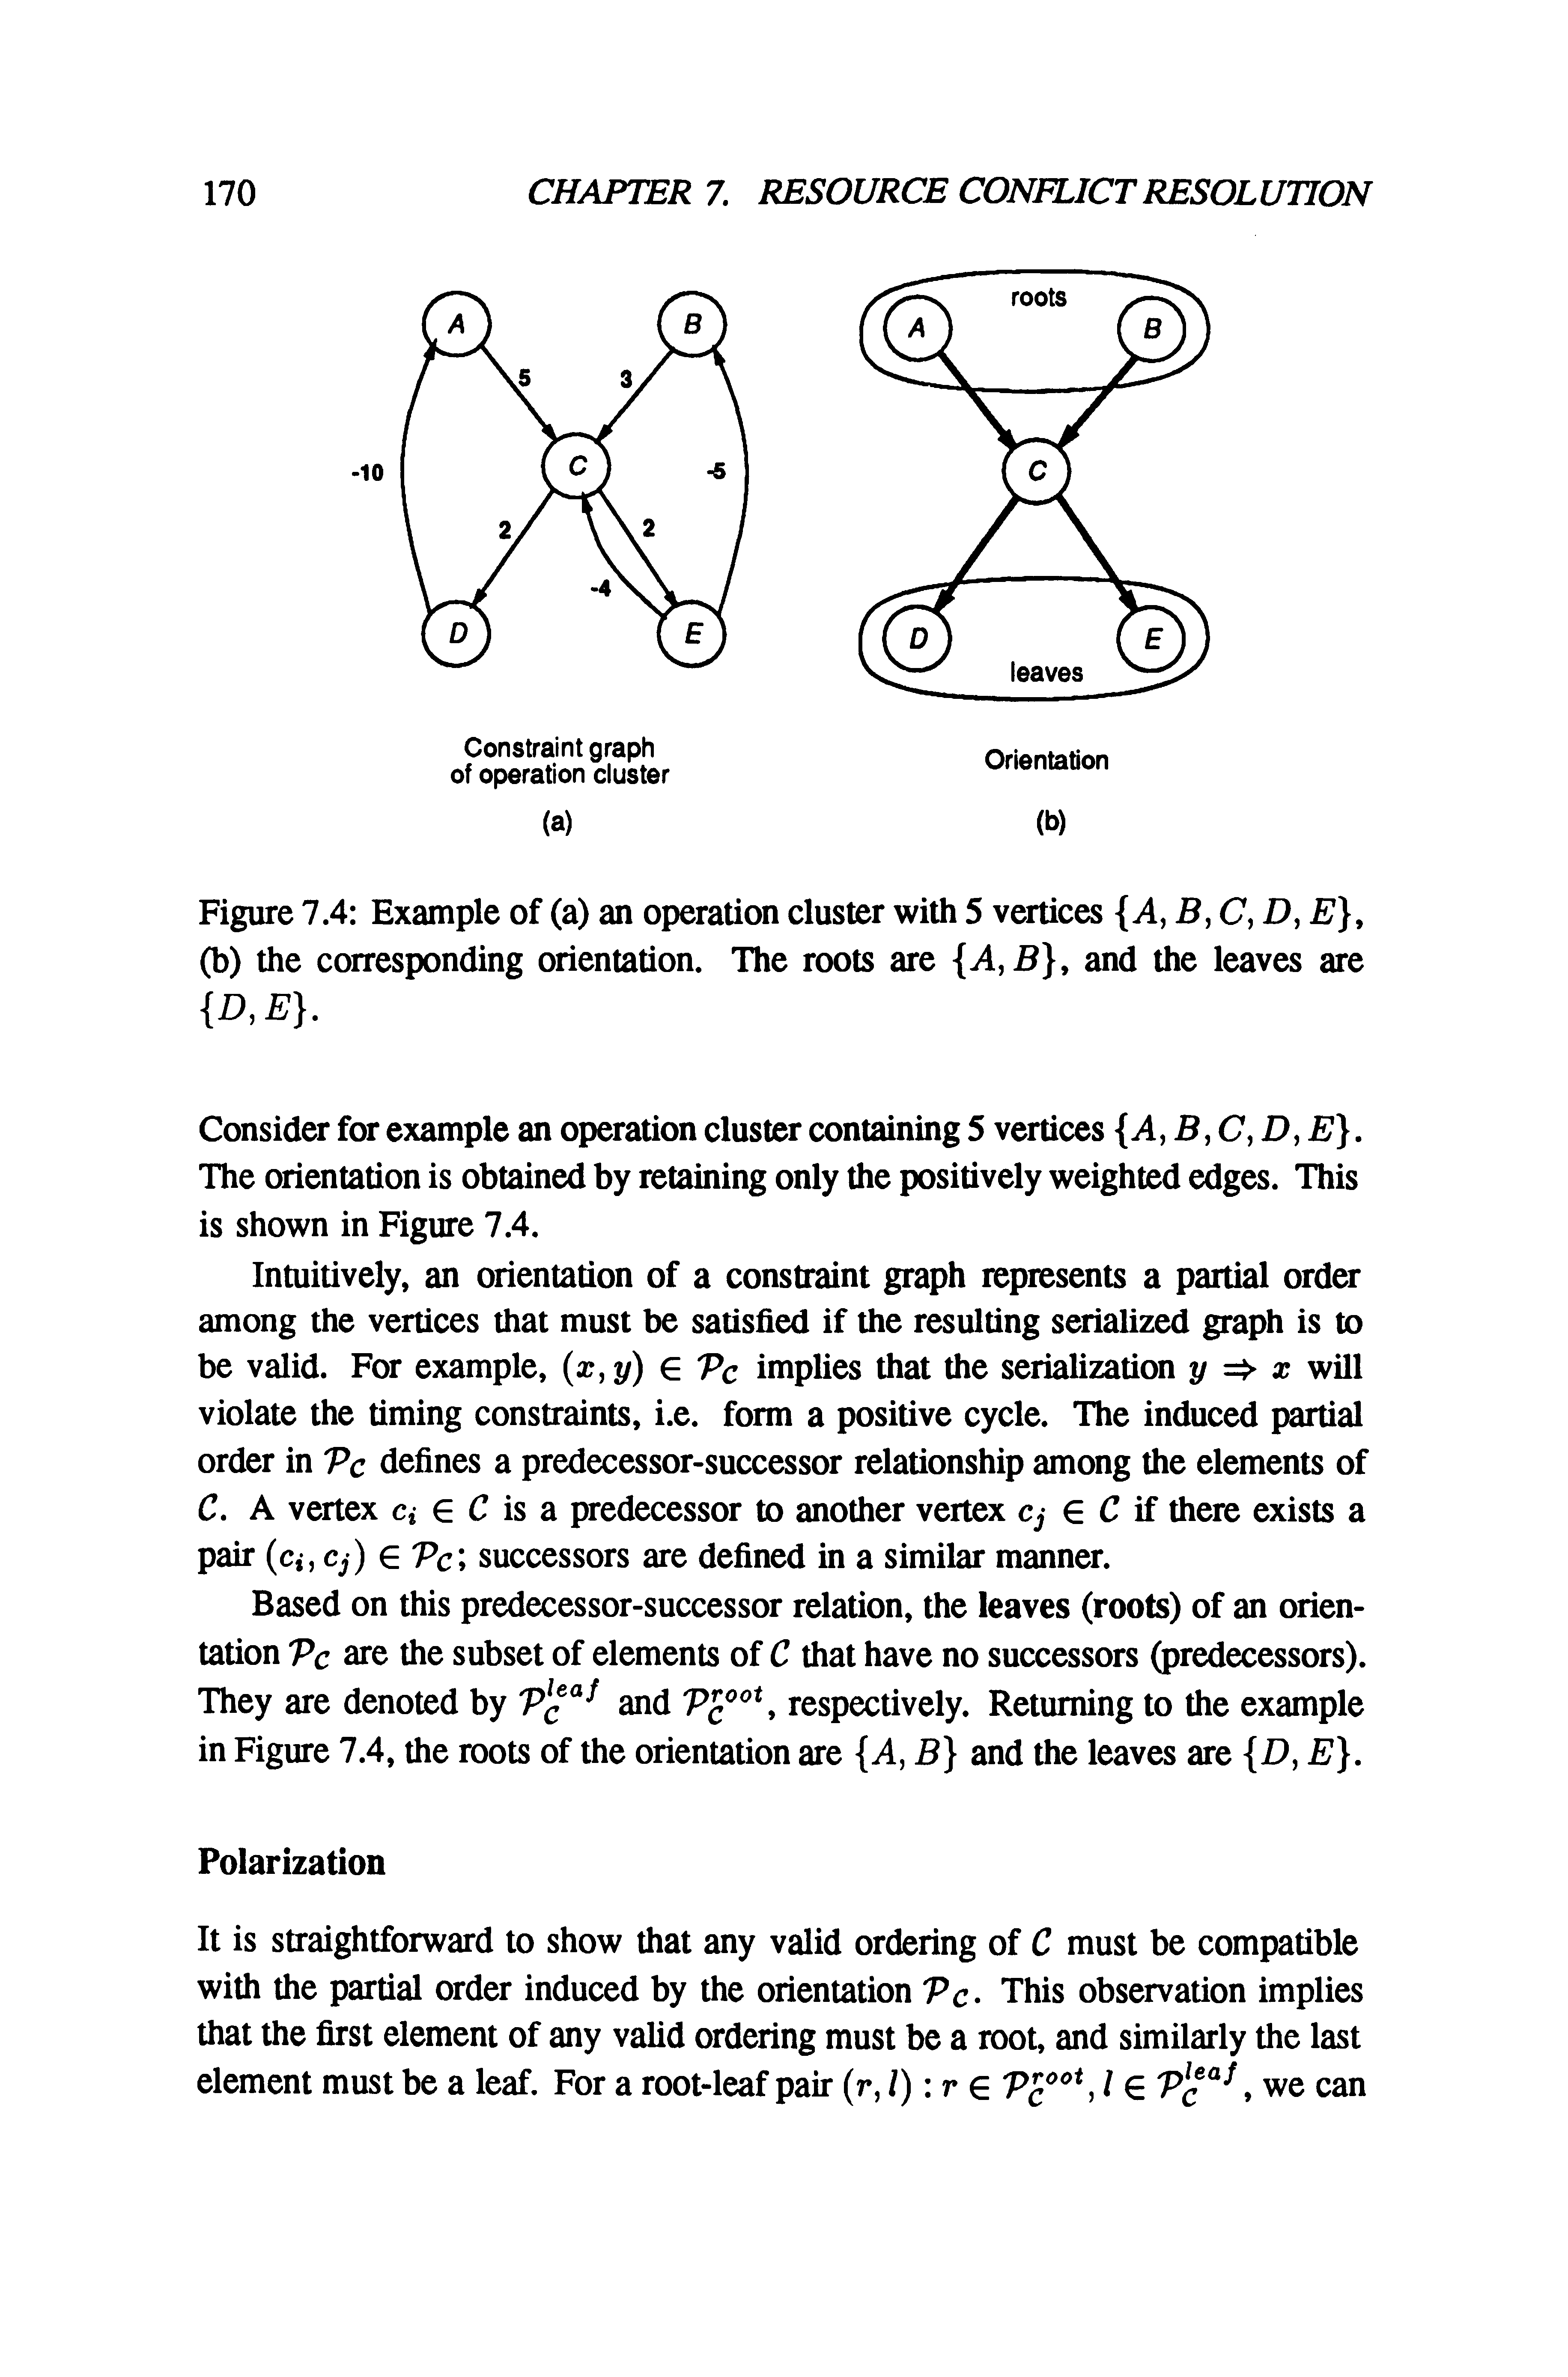 Figure 7.4 Example of (a) an operation cluster with 5 vatices 4, B, C, D, E), (b) the corresponding orientation. The roots are A,B, and the leaves are...